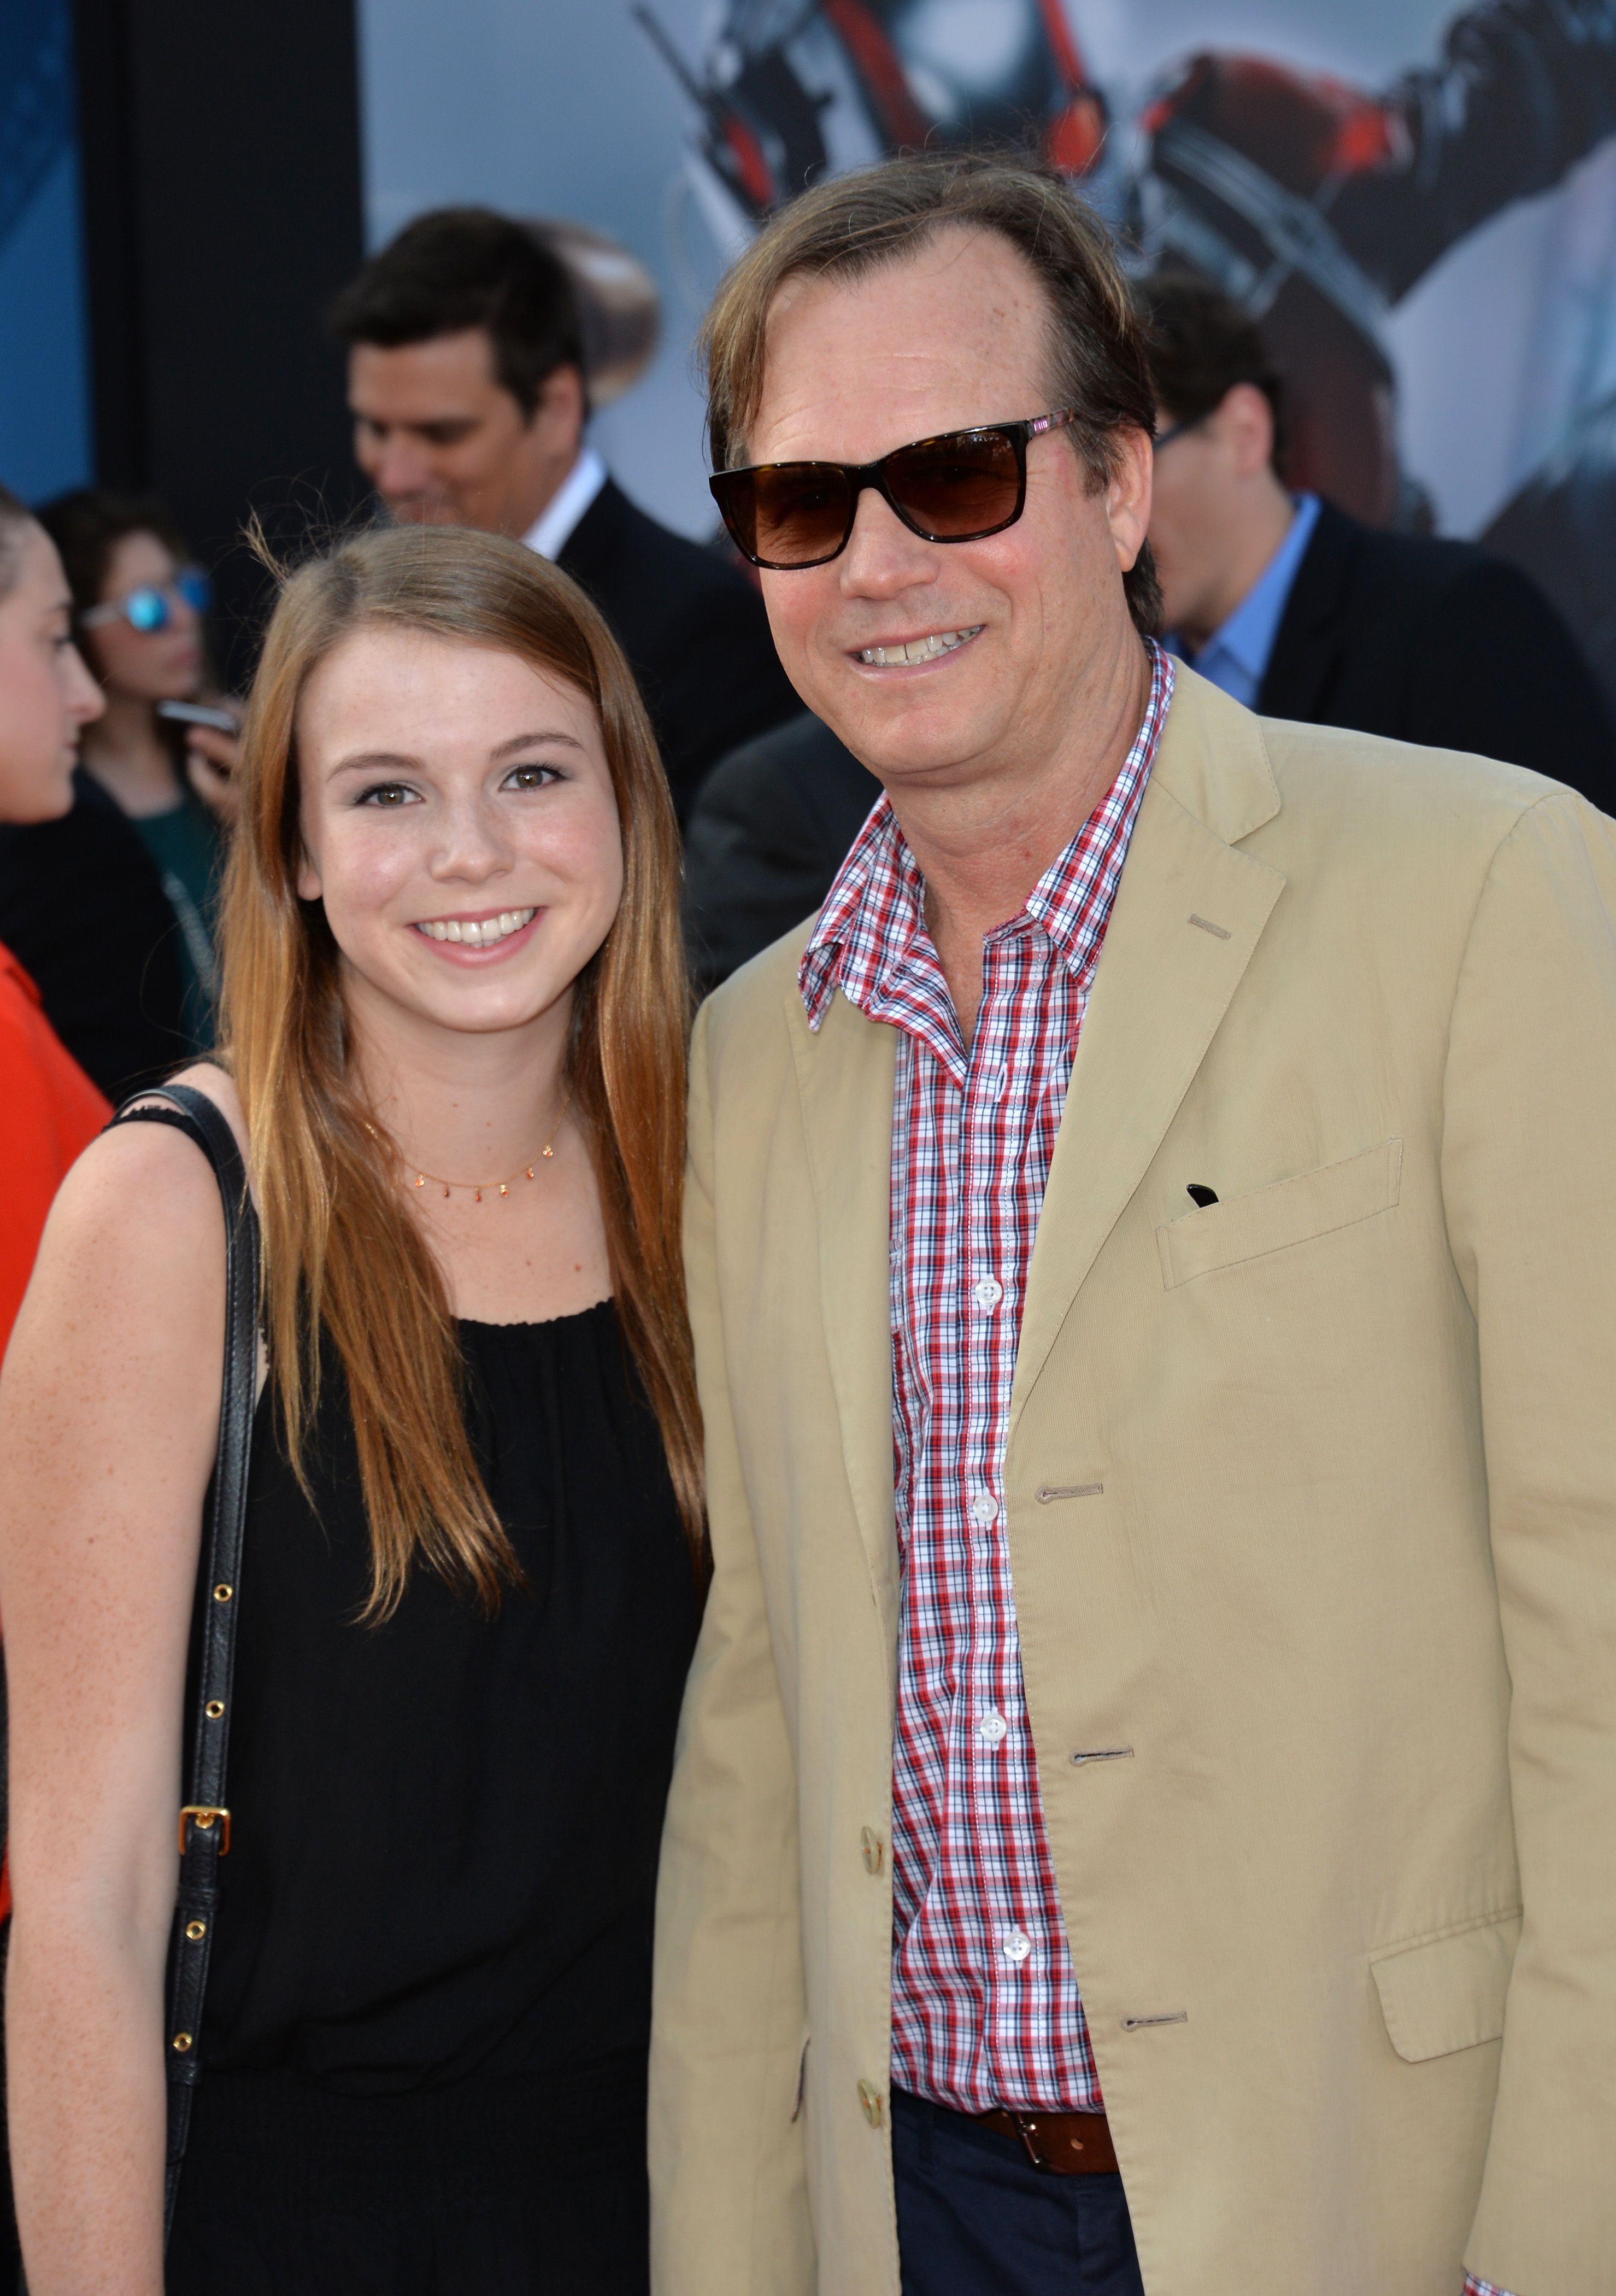 Lydia Paxton smiles in a black dress next to Bill in sunglasses and a tan blazer.